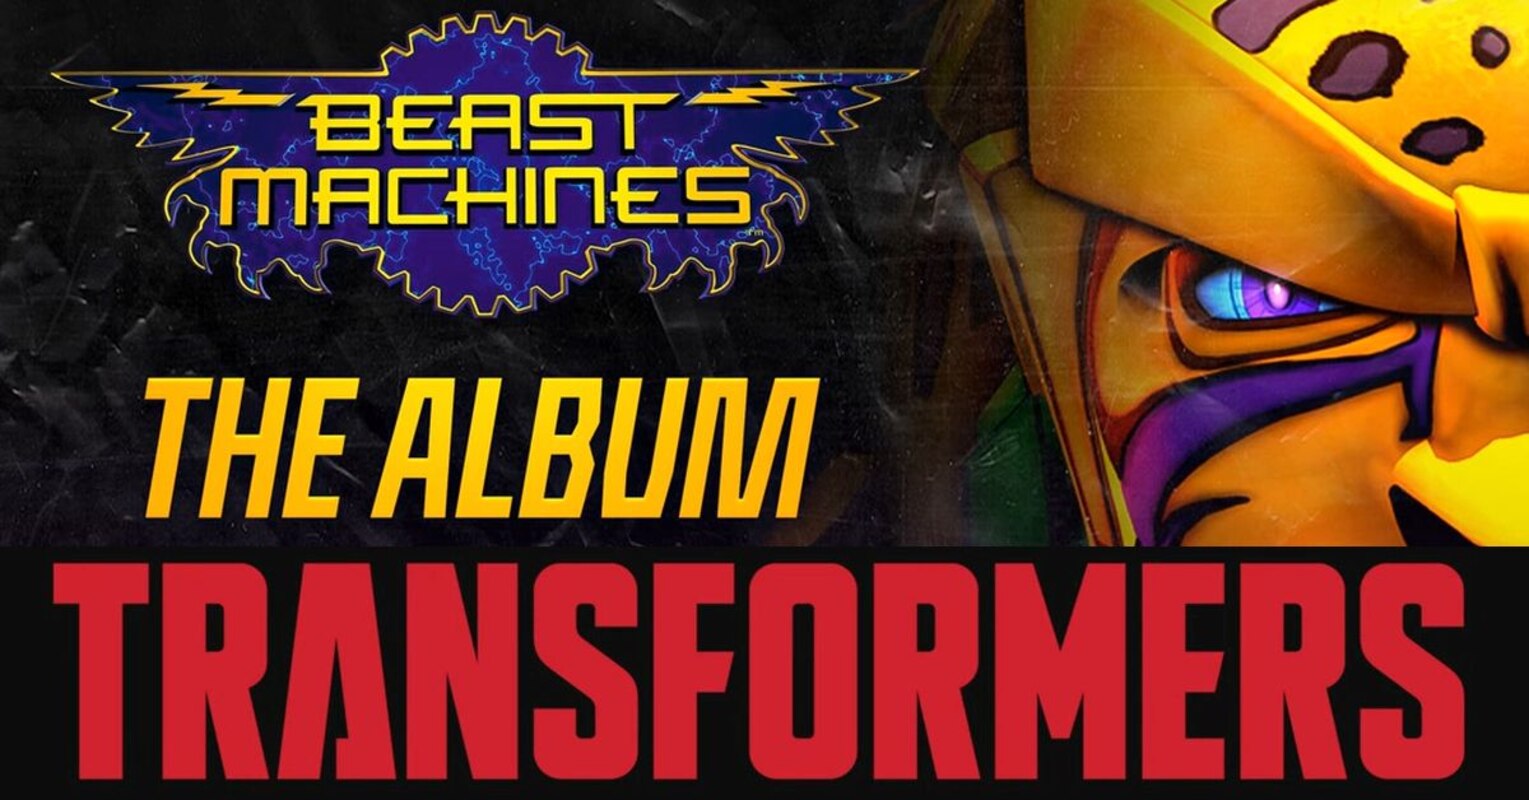 Beast Machines The Album - Original Soundtrack from Transformers TV Show Streaming Now